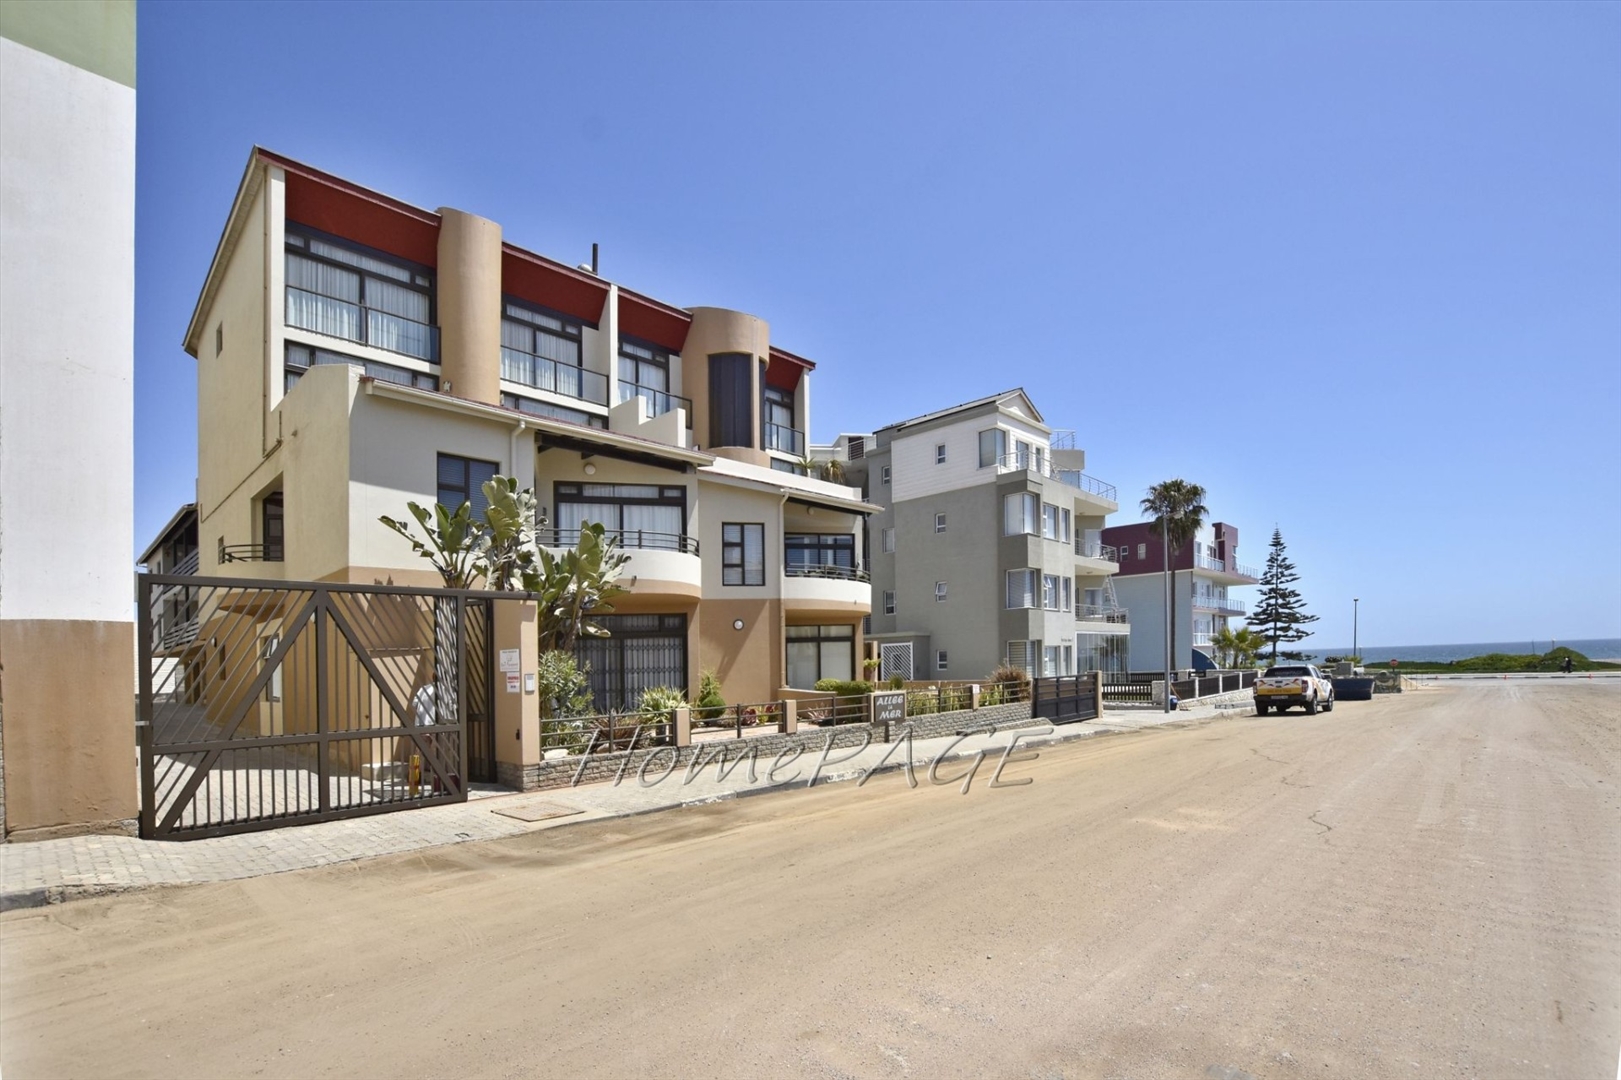 Modern Apartments For Sale In Swakopmund for Small Space